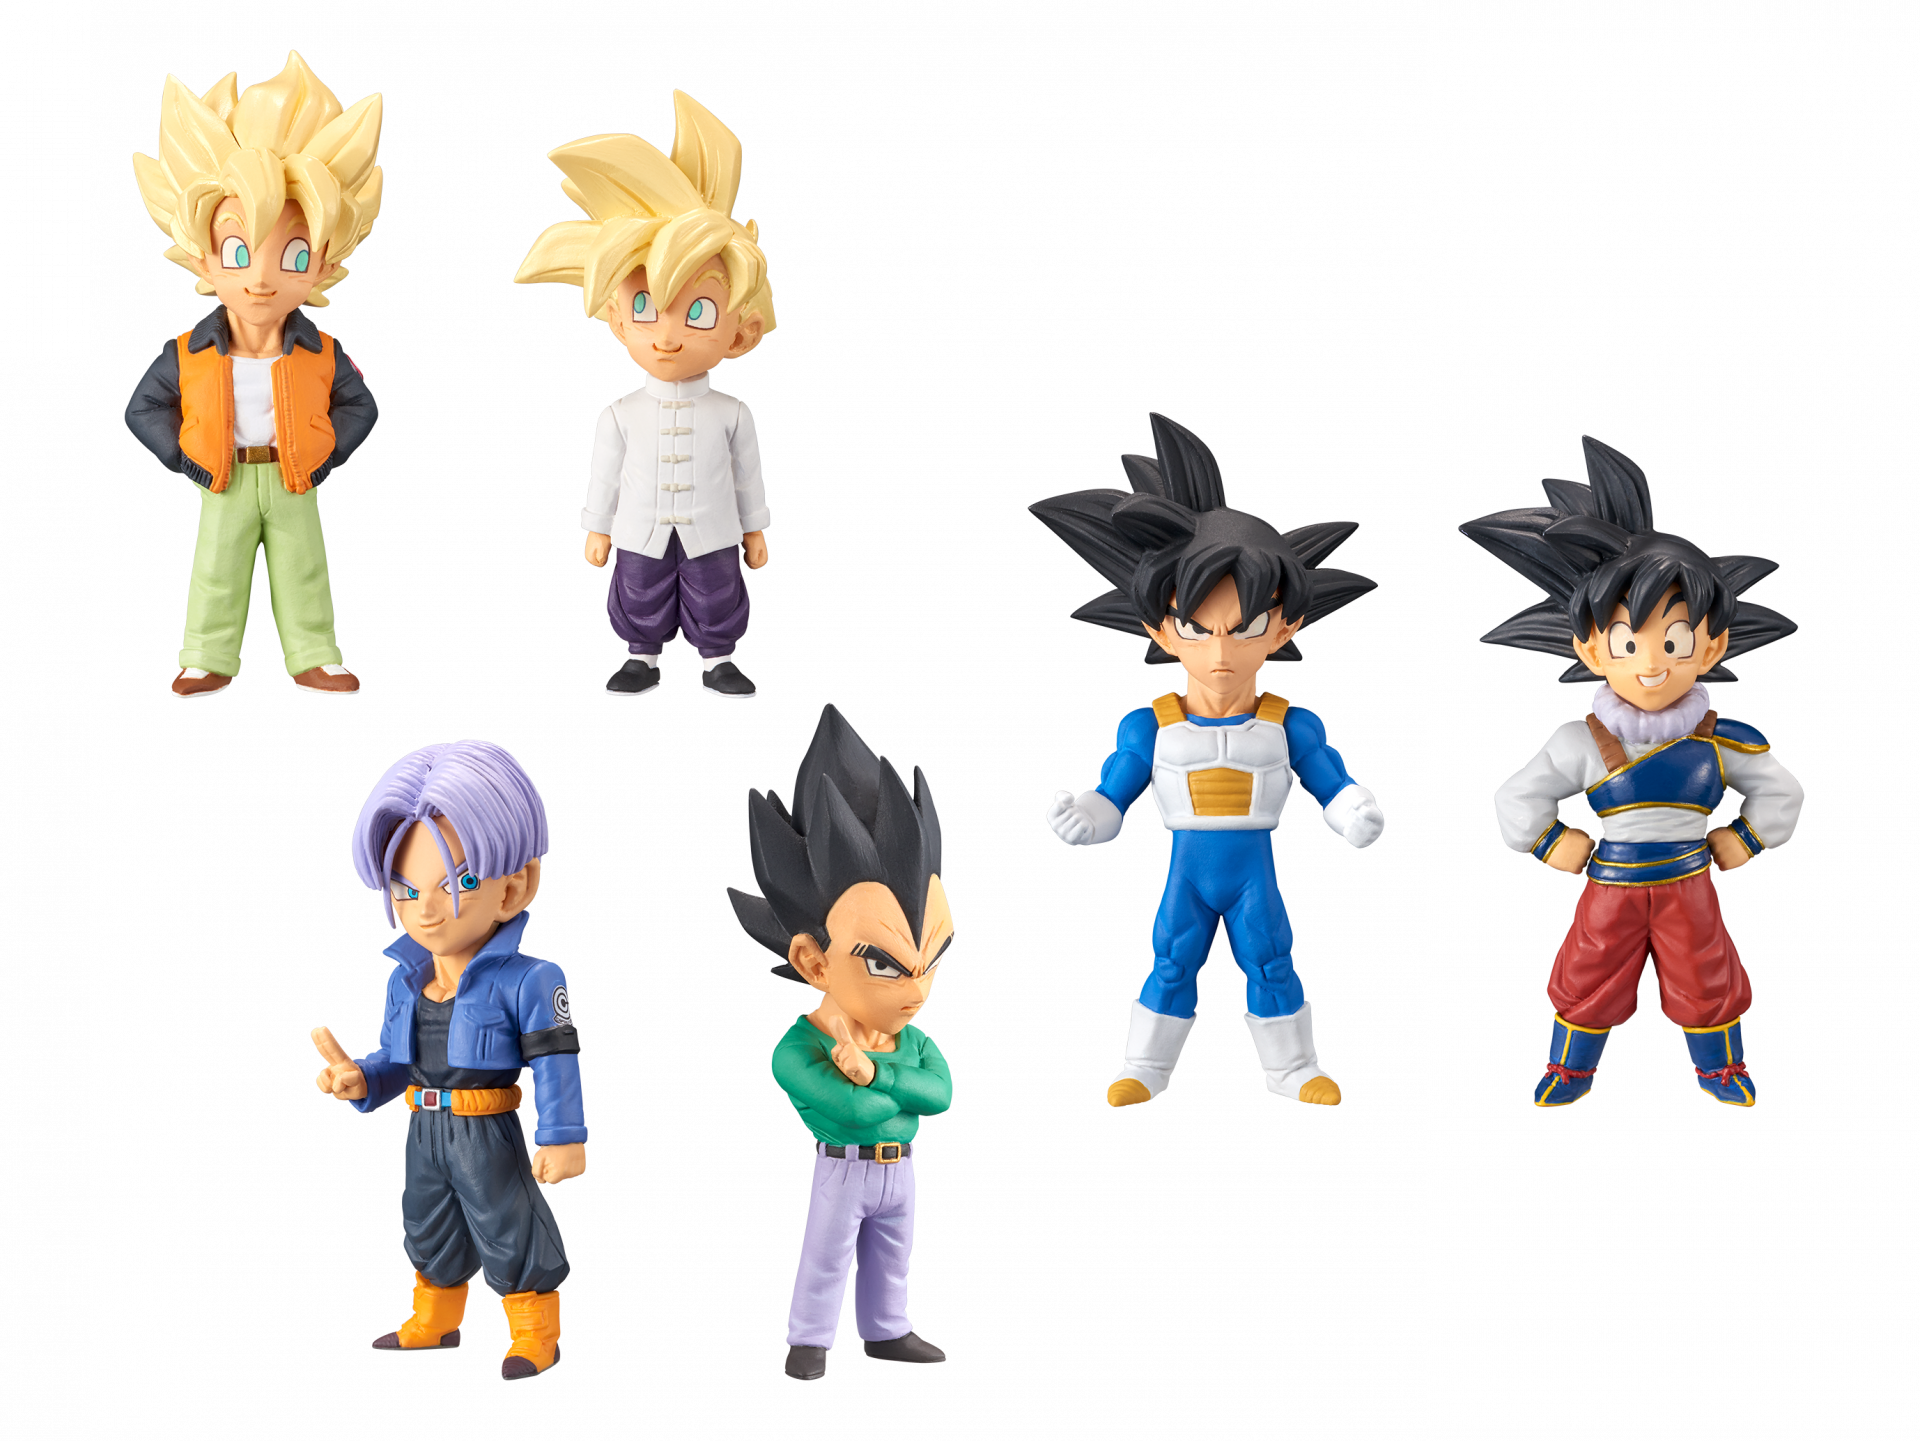 New Additions to the World Collectable Figure Series Coming to Game Centers!